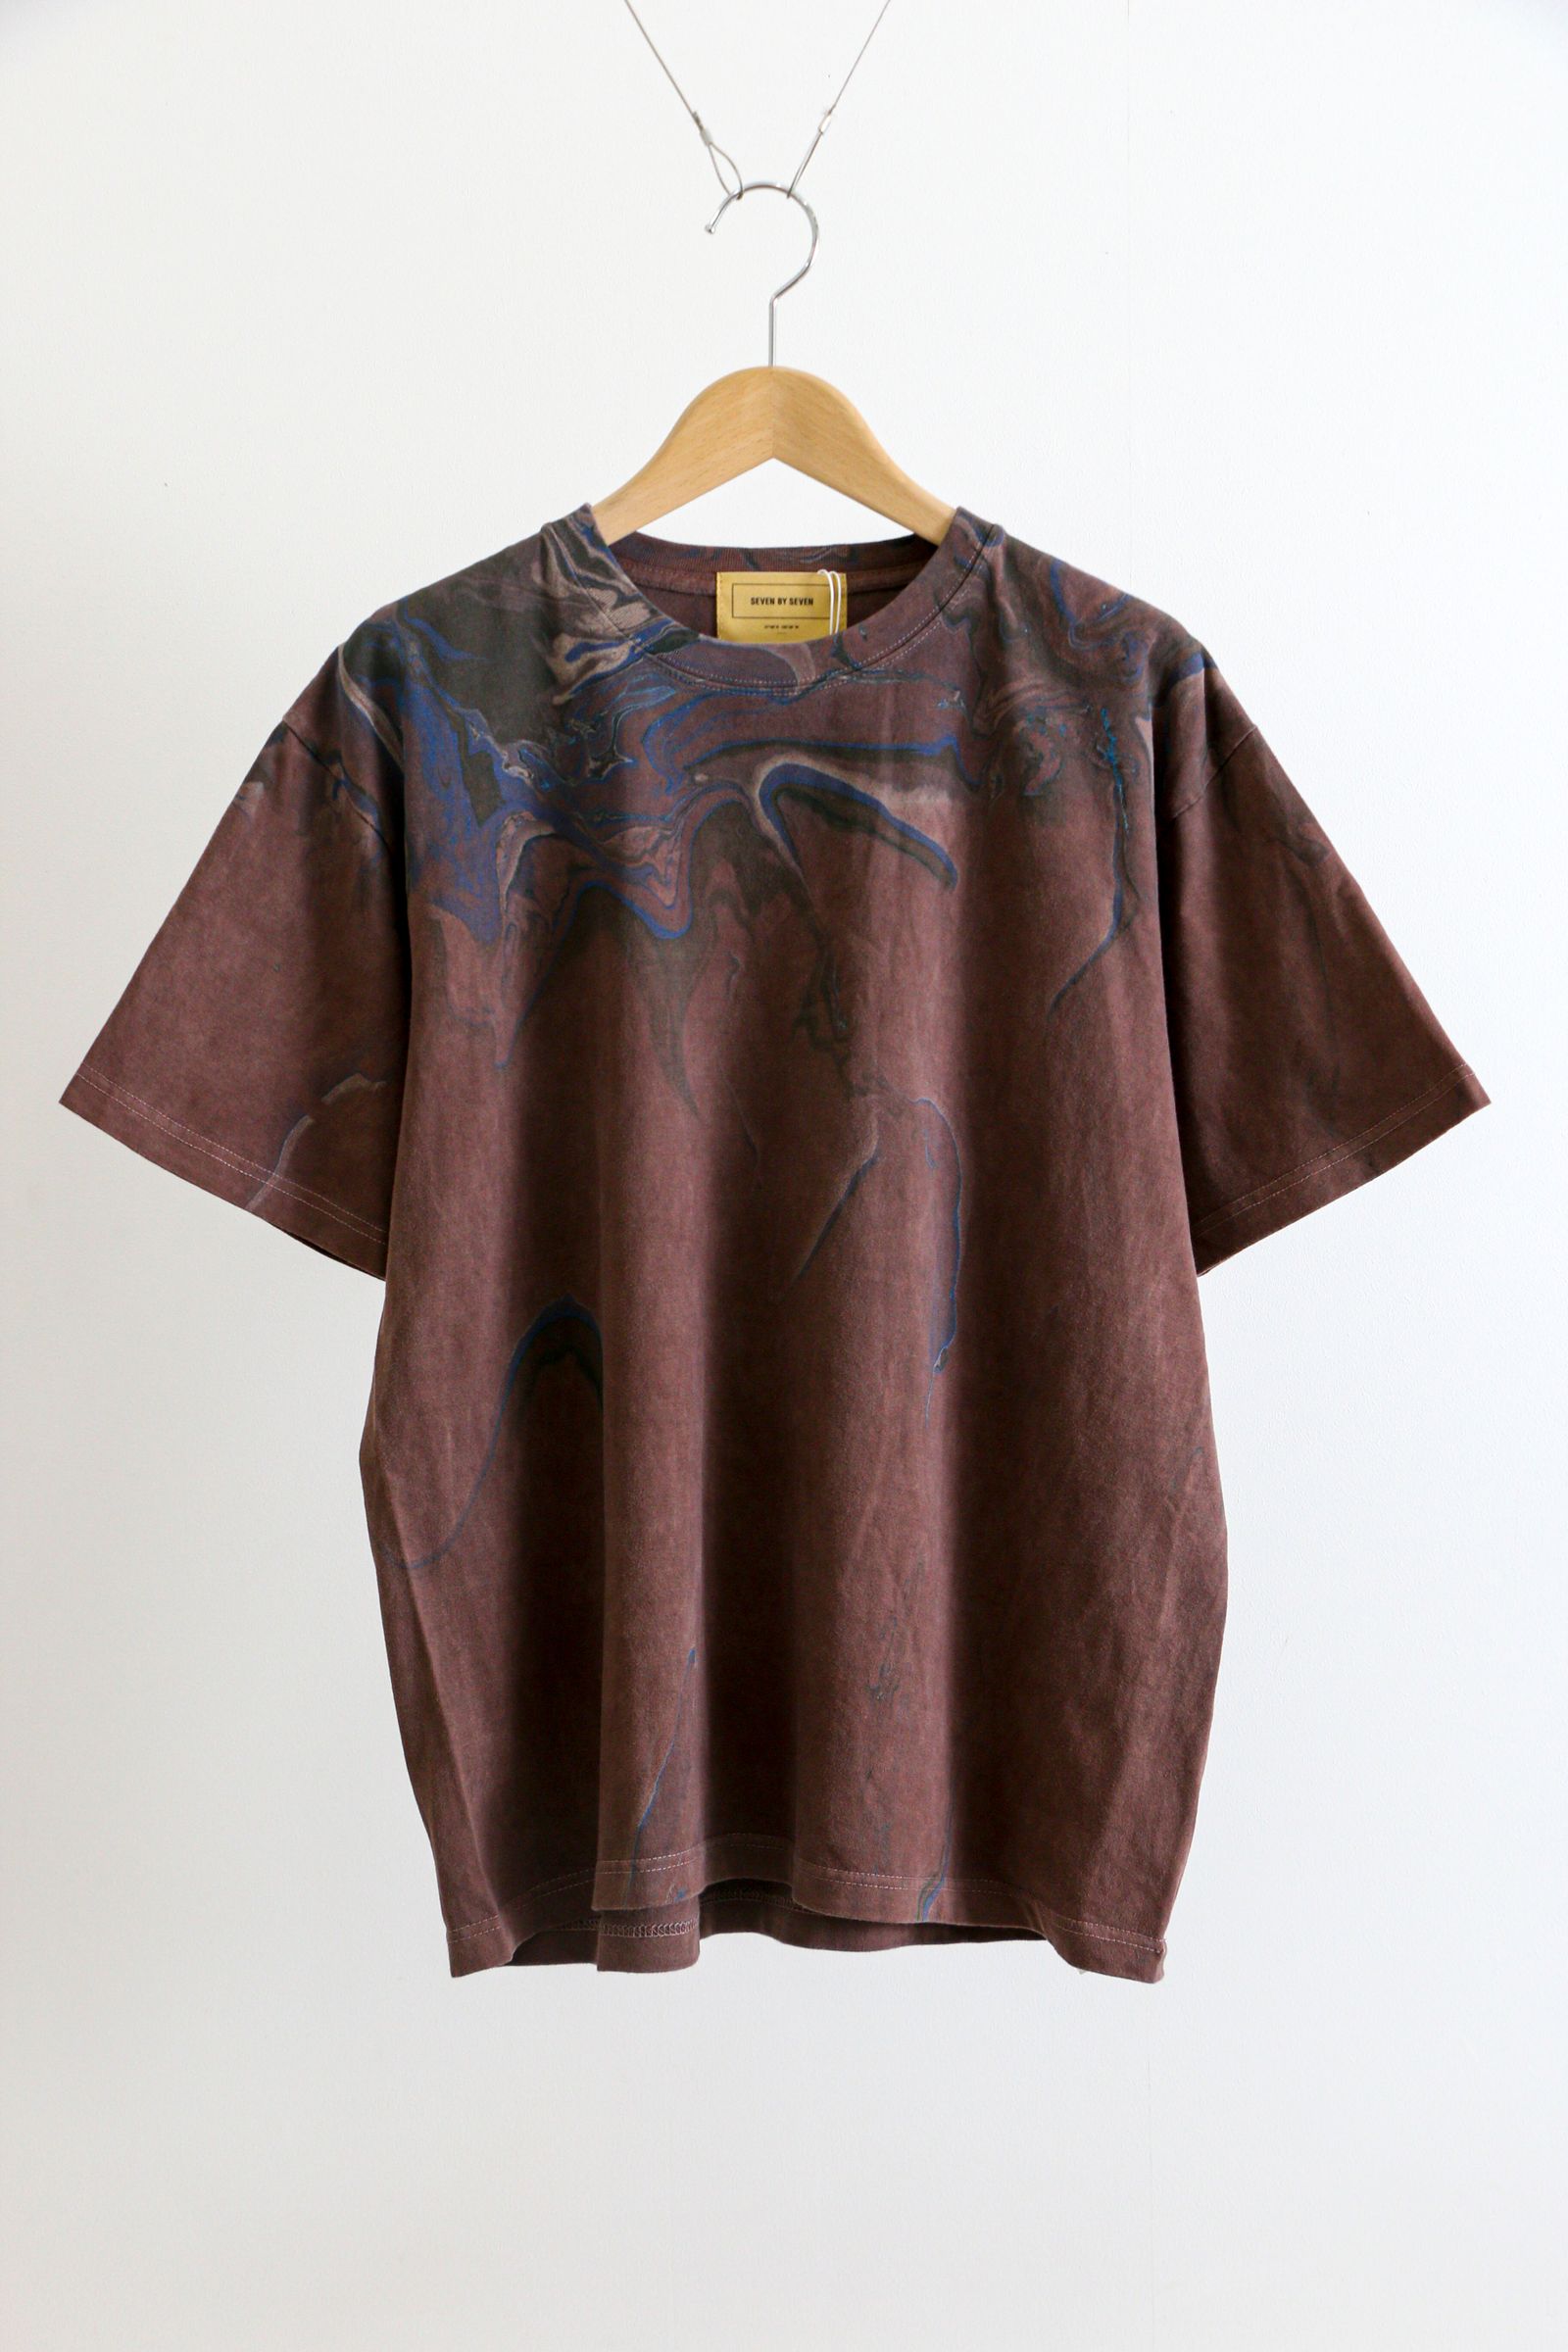 SEVEN BY SEVEN - PIGMENT DYED TEE - Hydro dip dyeing - BRW 